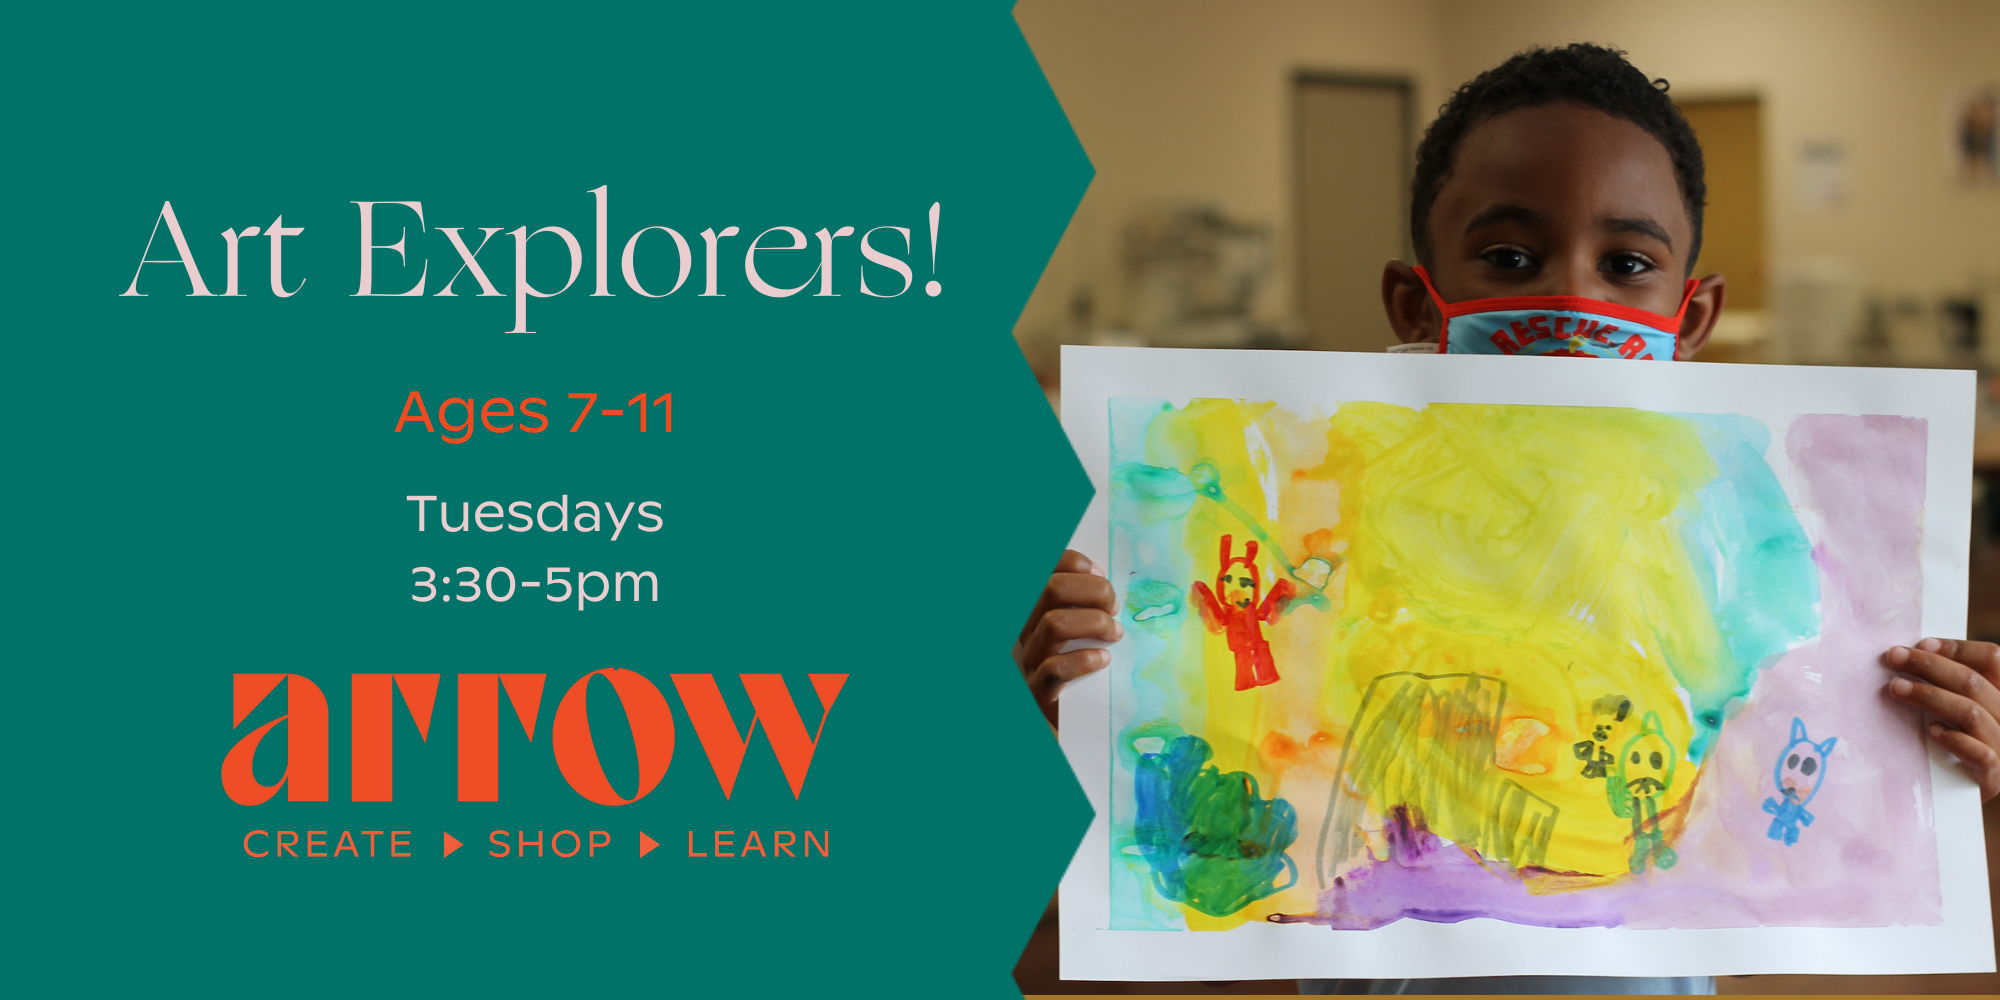 Art Explorers: A Class for Mini-Makers with Terri Scott promotional image